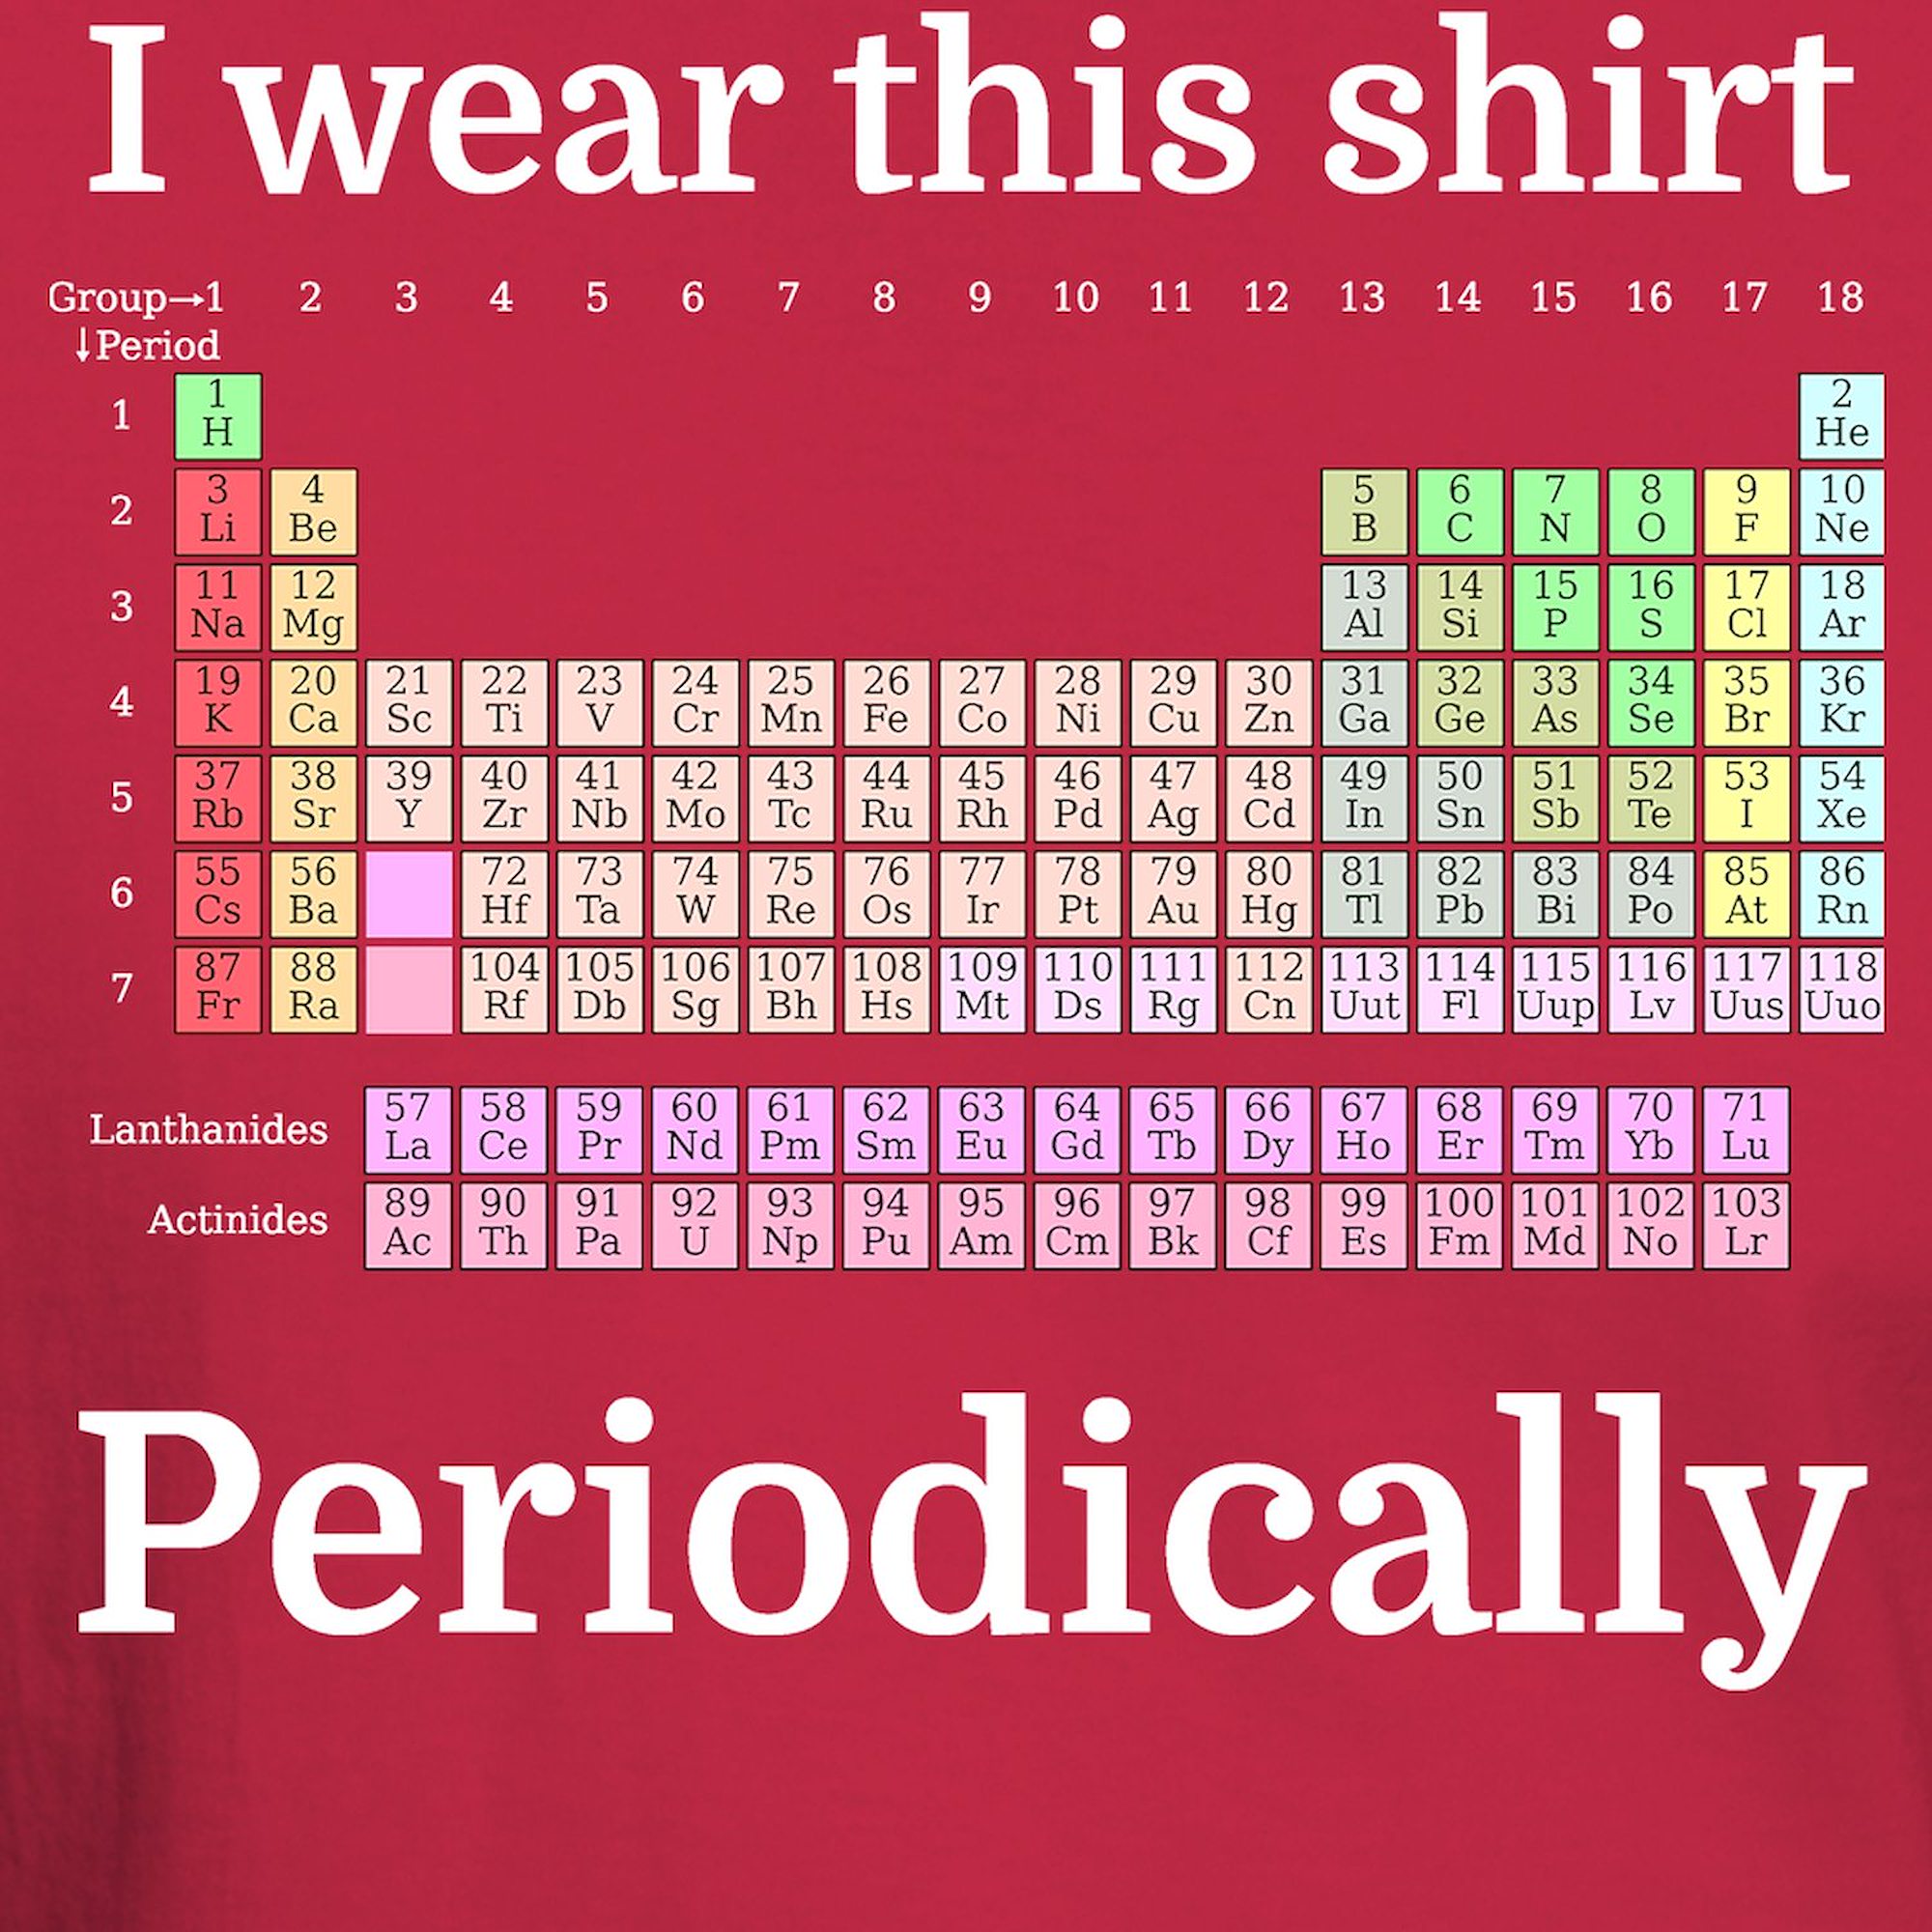 CafePress - I Wear This Shirt Periodically T Shirt - 100% Cotton T-Shirt - image 3 of 4